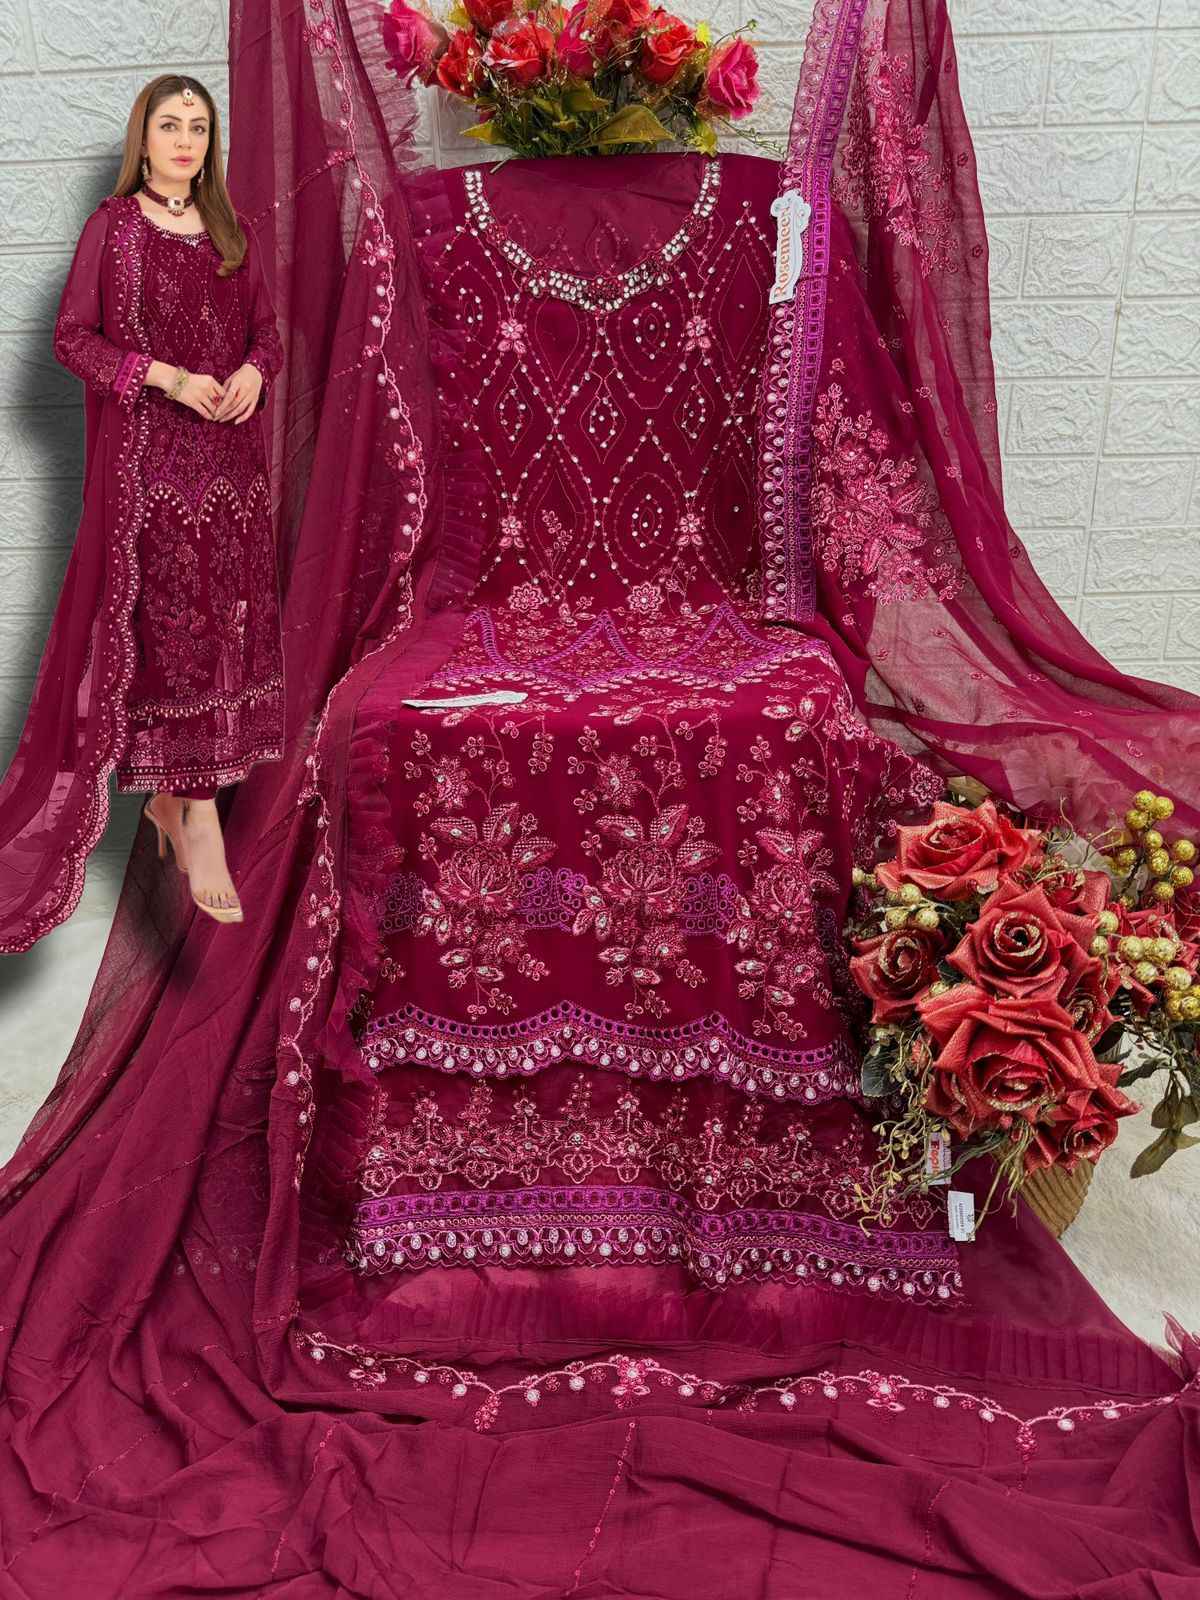 Fepic Rosemeen C-1777 Georgette Embroidered Dress Material (3 Pc Catalog)